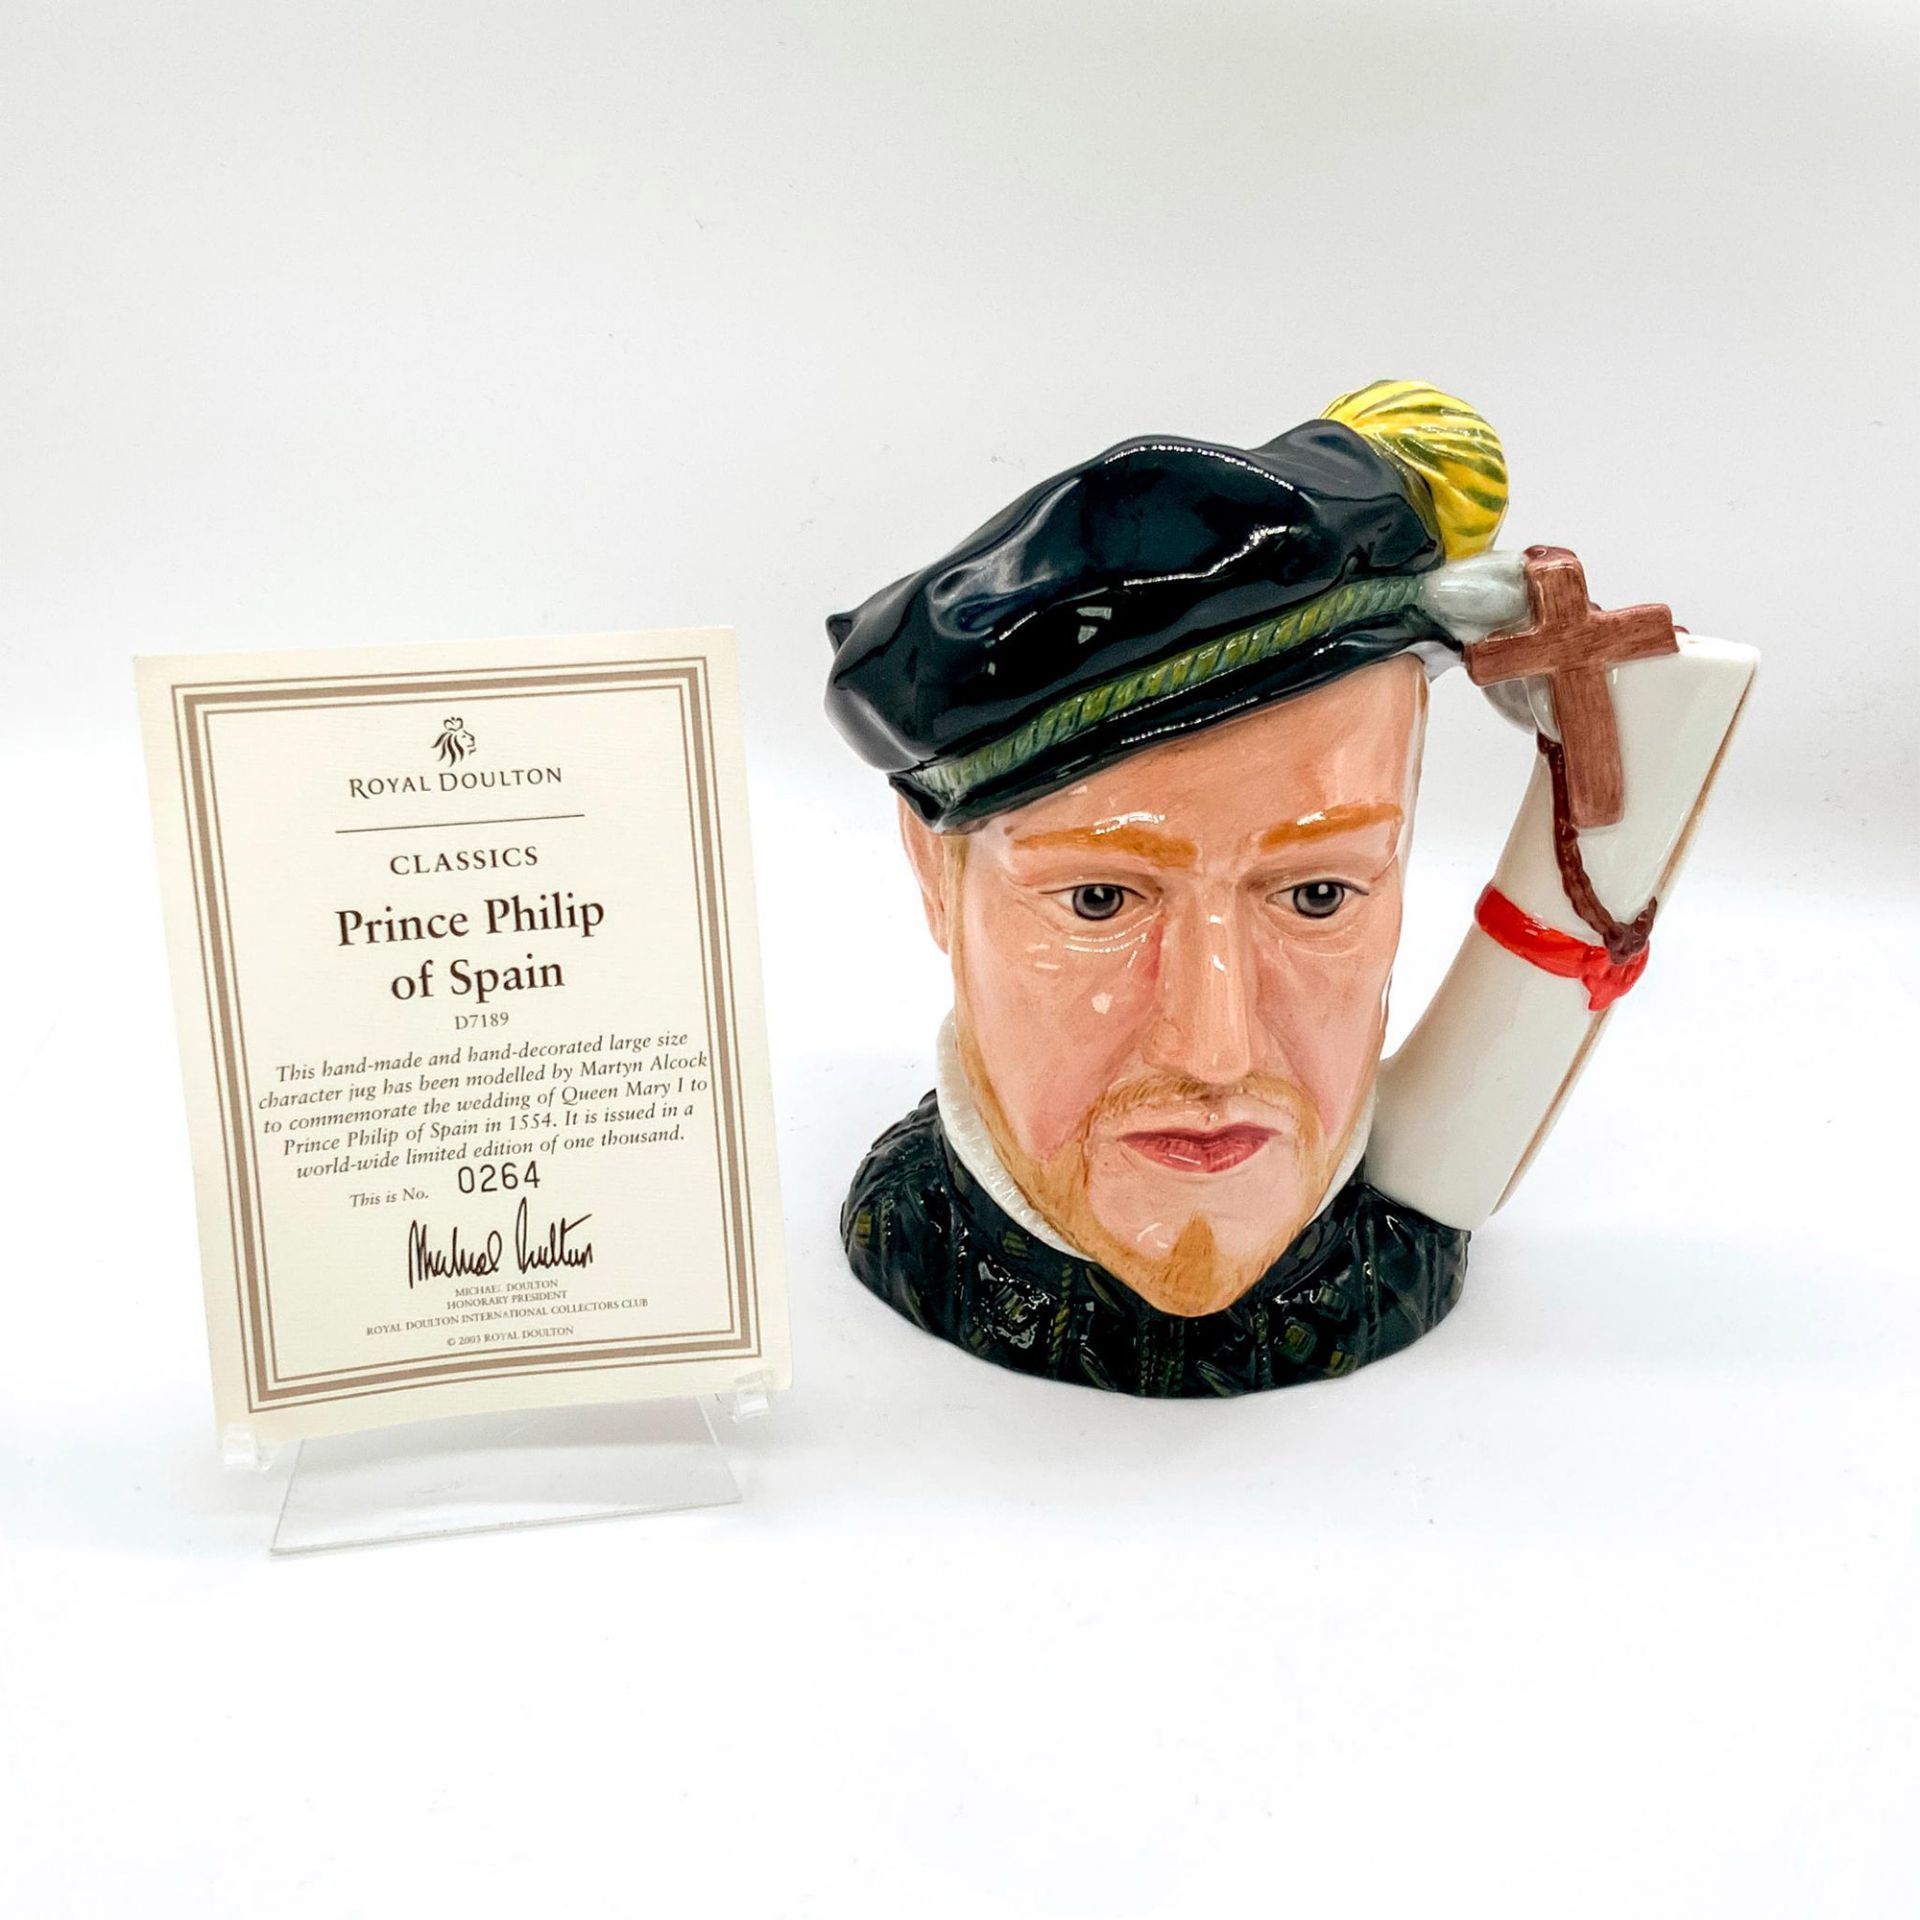 Prince Philip of Spain D7189 - Large - Royal Doulton Character Jug - Image 2 of 4